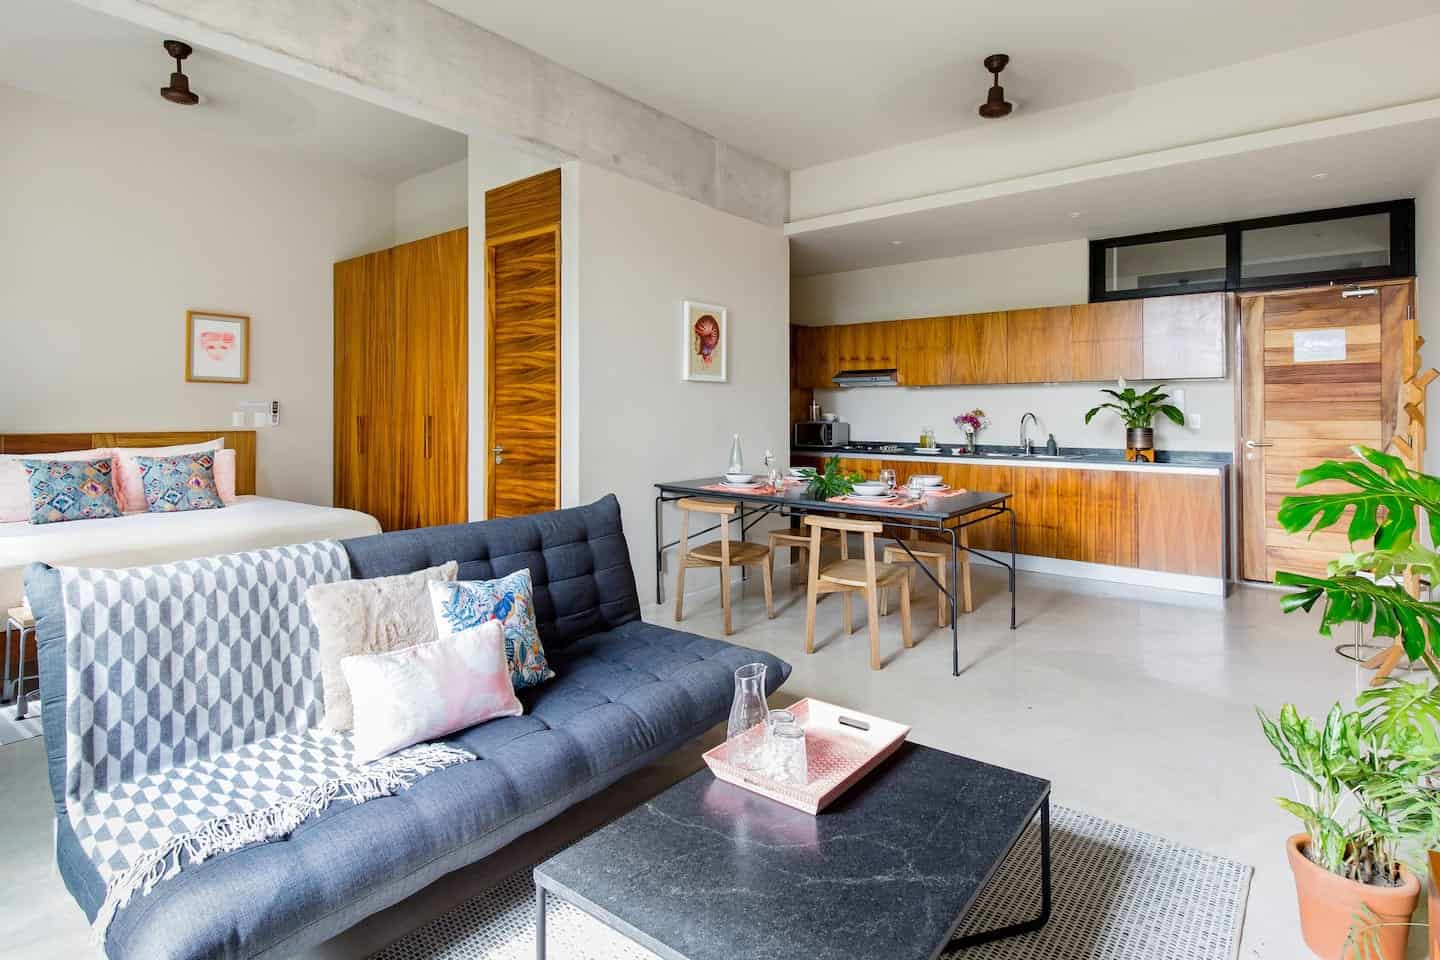 Image of Airbnb rental in Cancun, Mexico